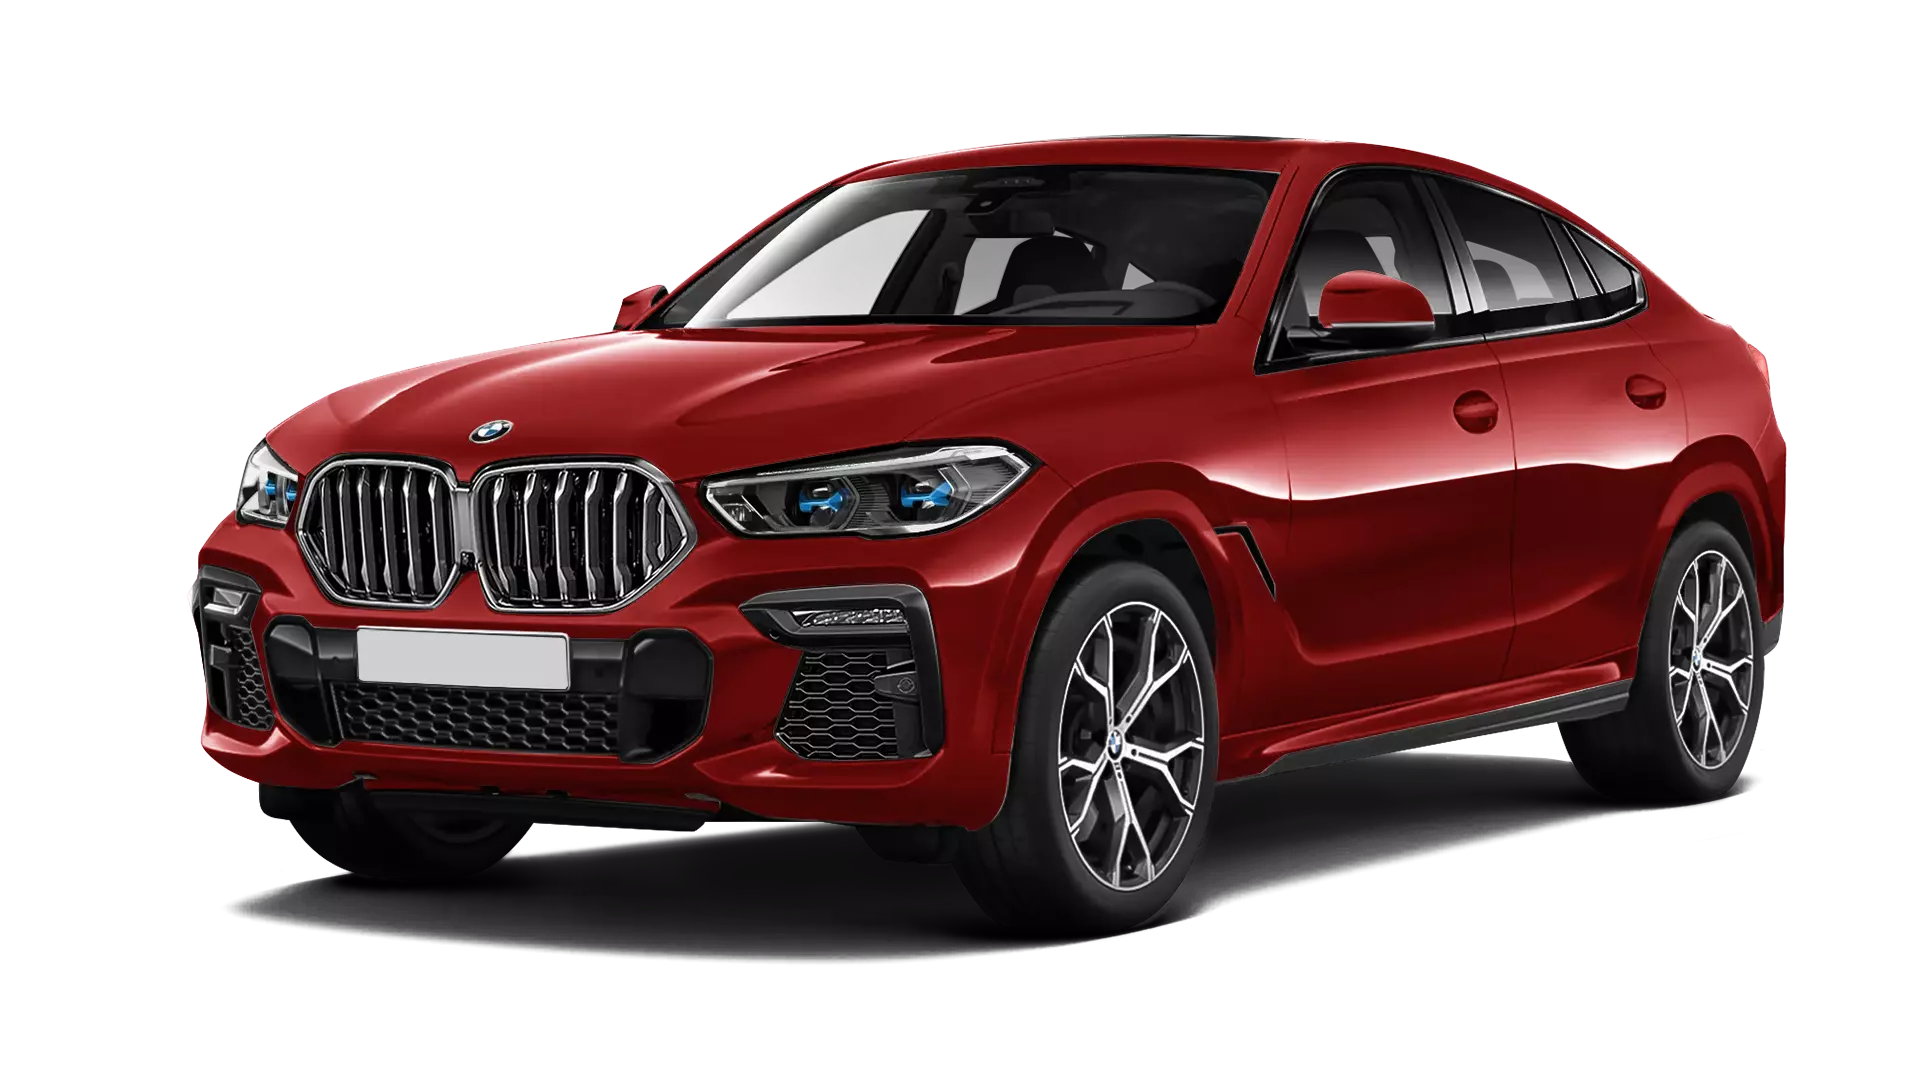 BMW X6 stock front view in flamenco red